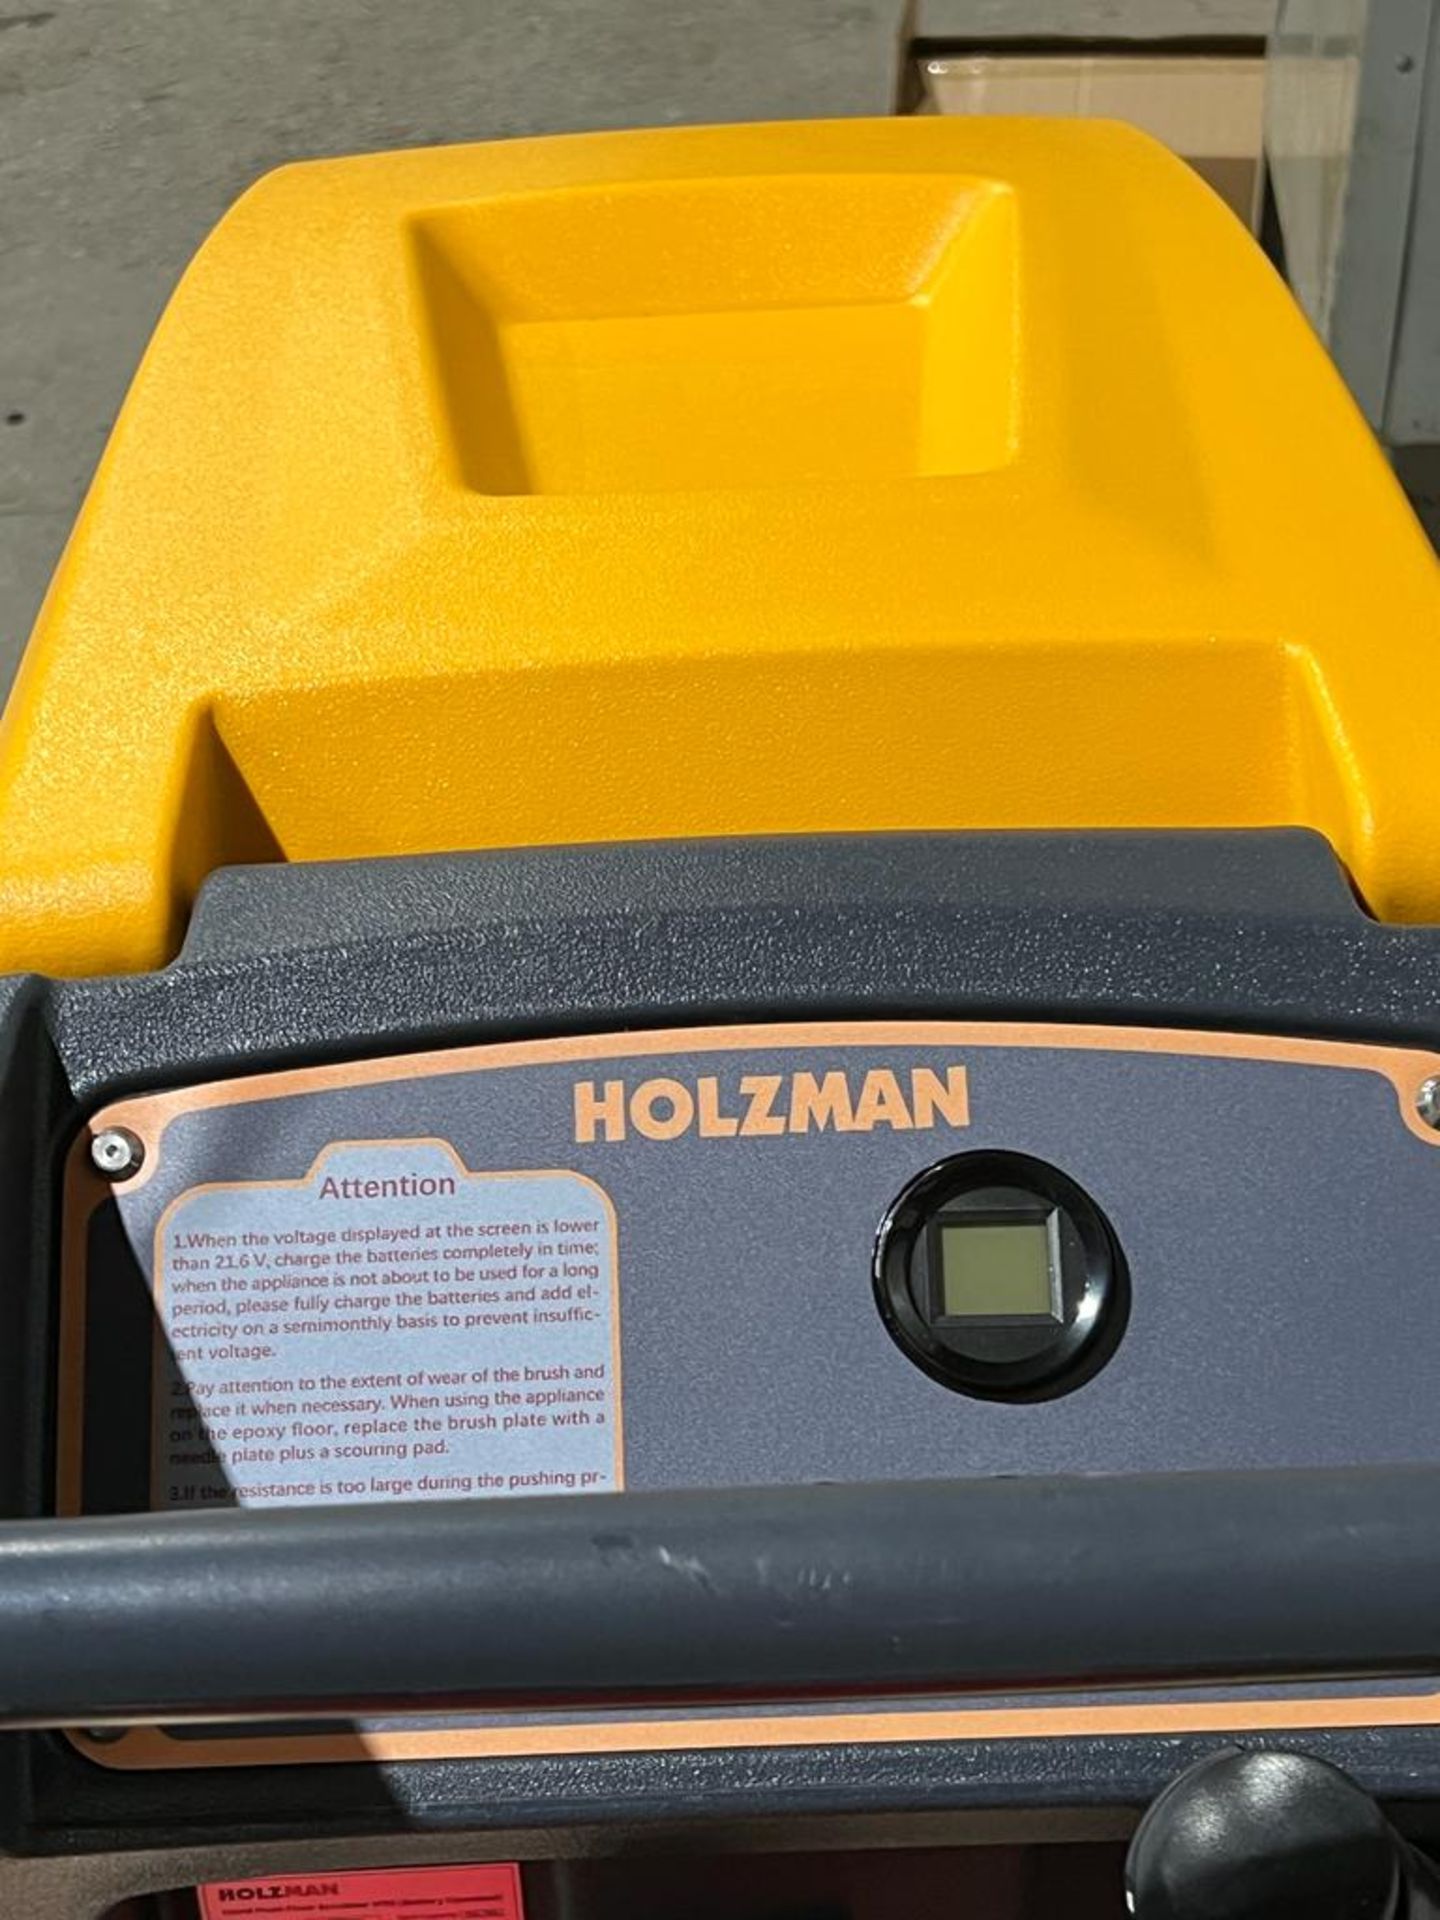 Holzman MINT Walk Behind Floor Sweeper Scrubber Unit model M50 - BRAND NEW with extra pads, - Image 4 of 7